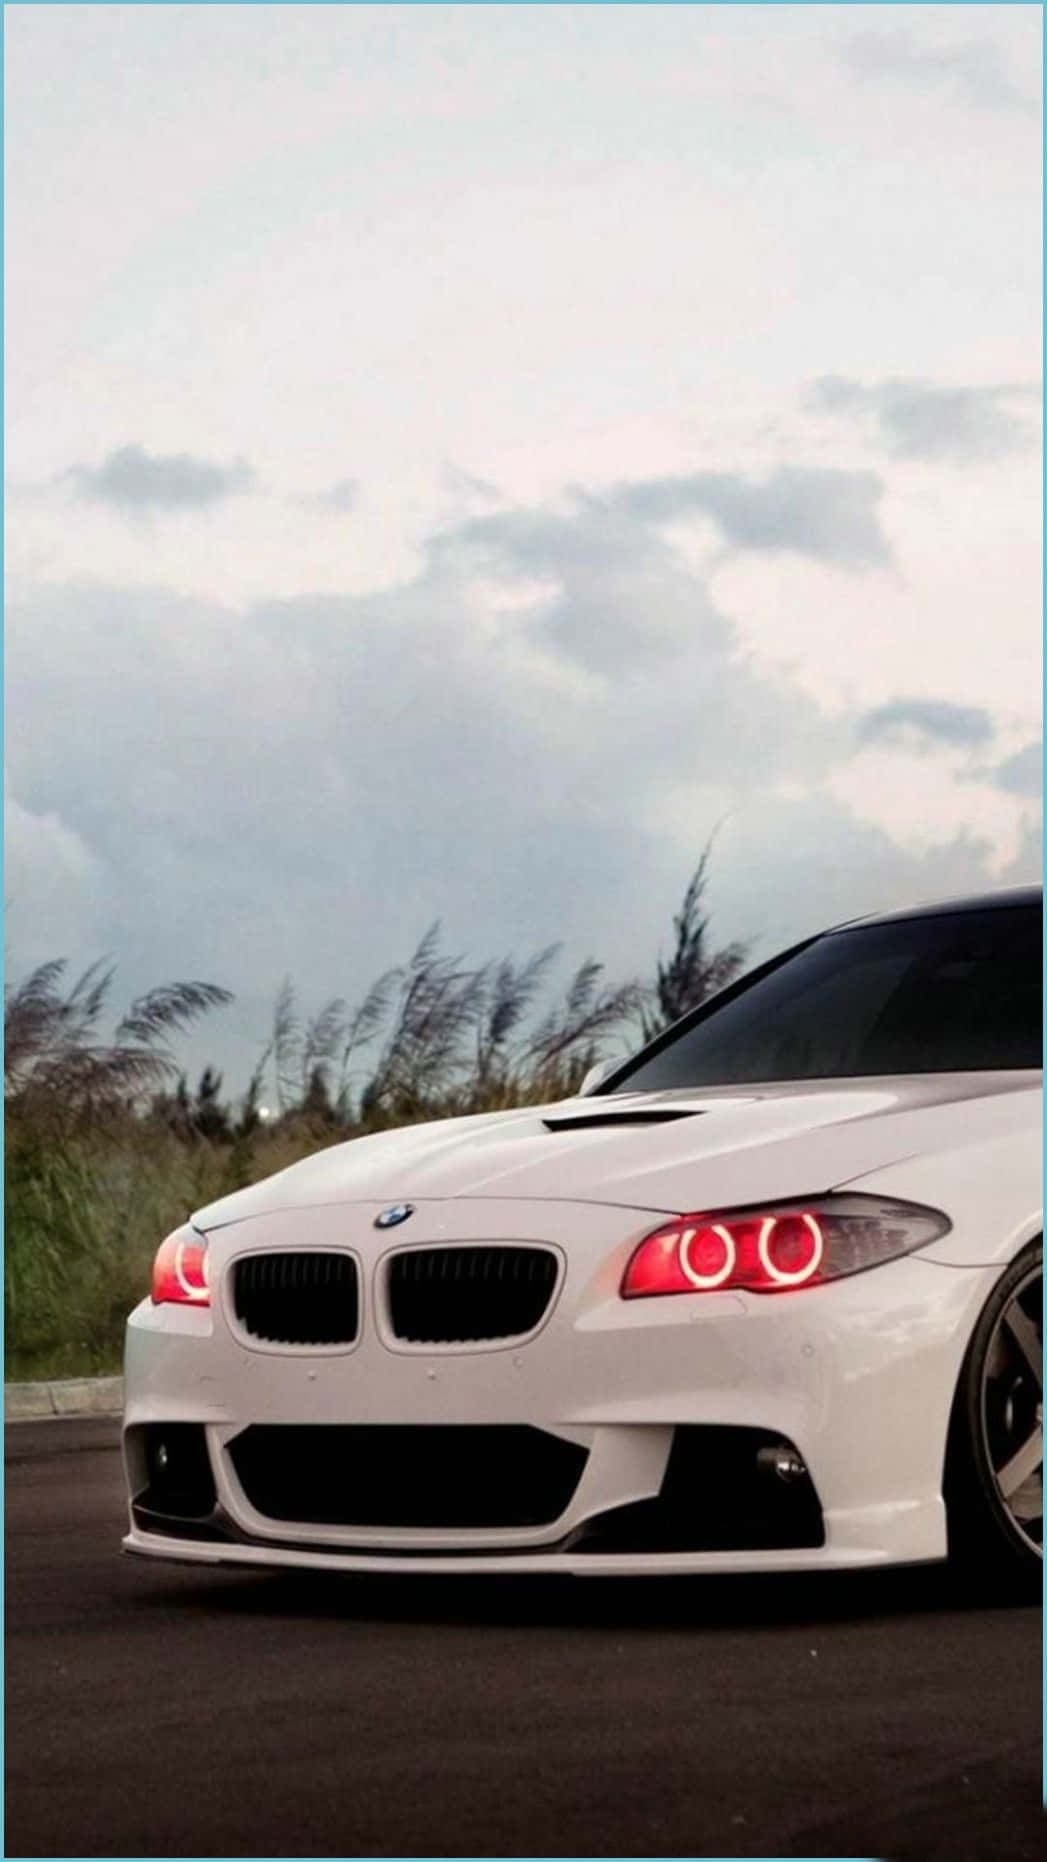 Weißerbmw Android Wallpaper